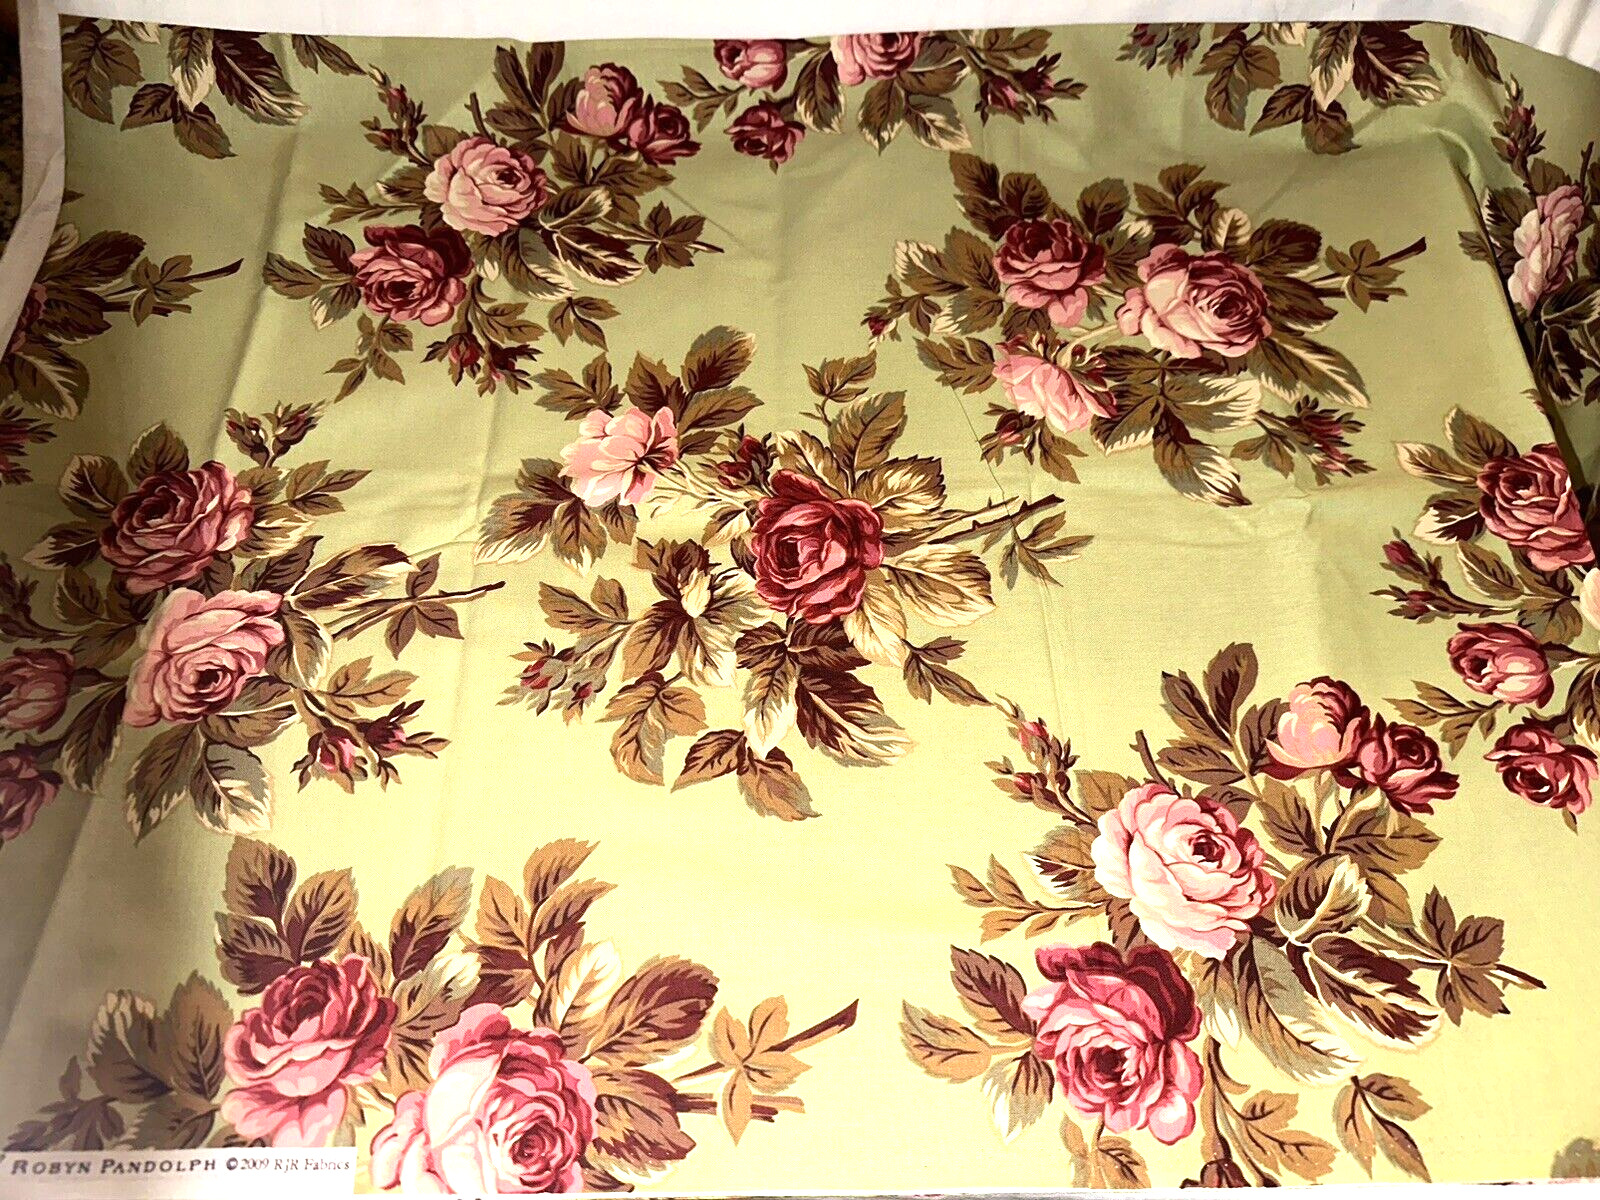 2-Yards Roses de Noel Cotton FABRIC by Robyn Pandolph for RJR Fabrics*